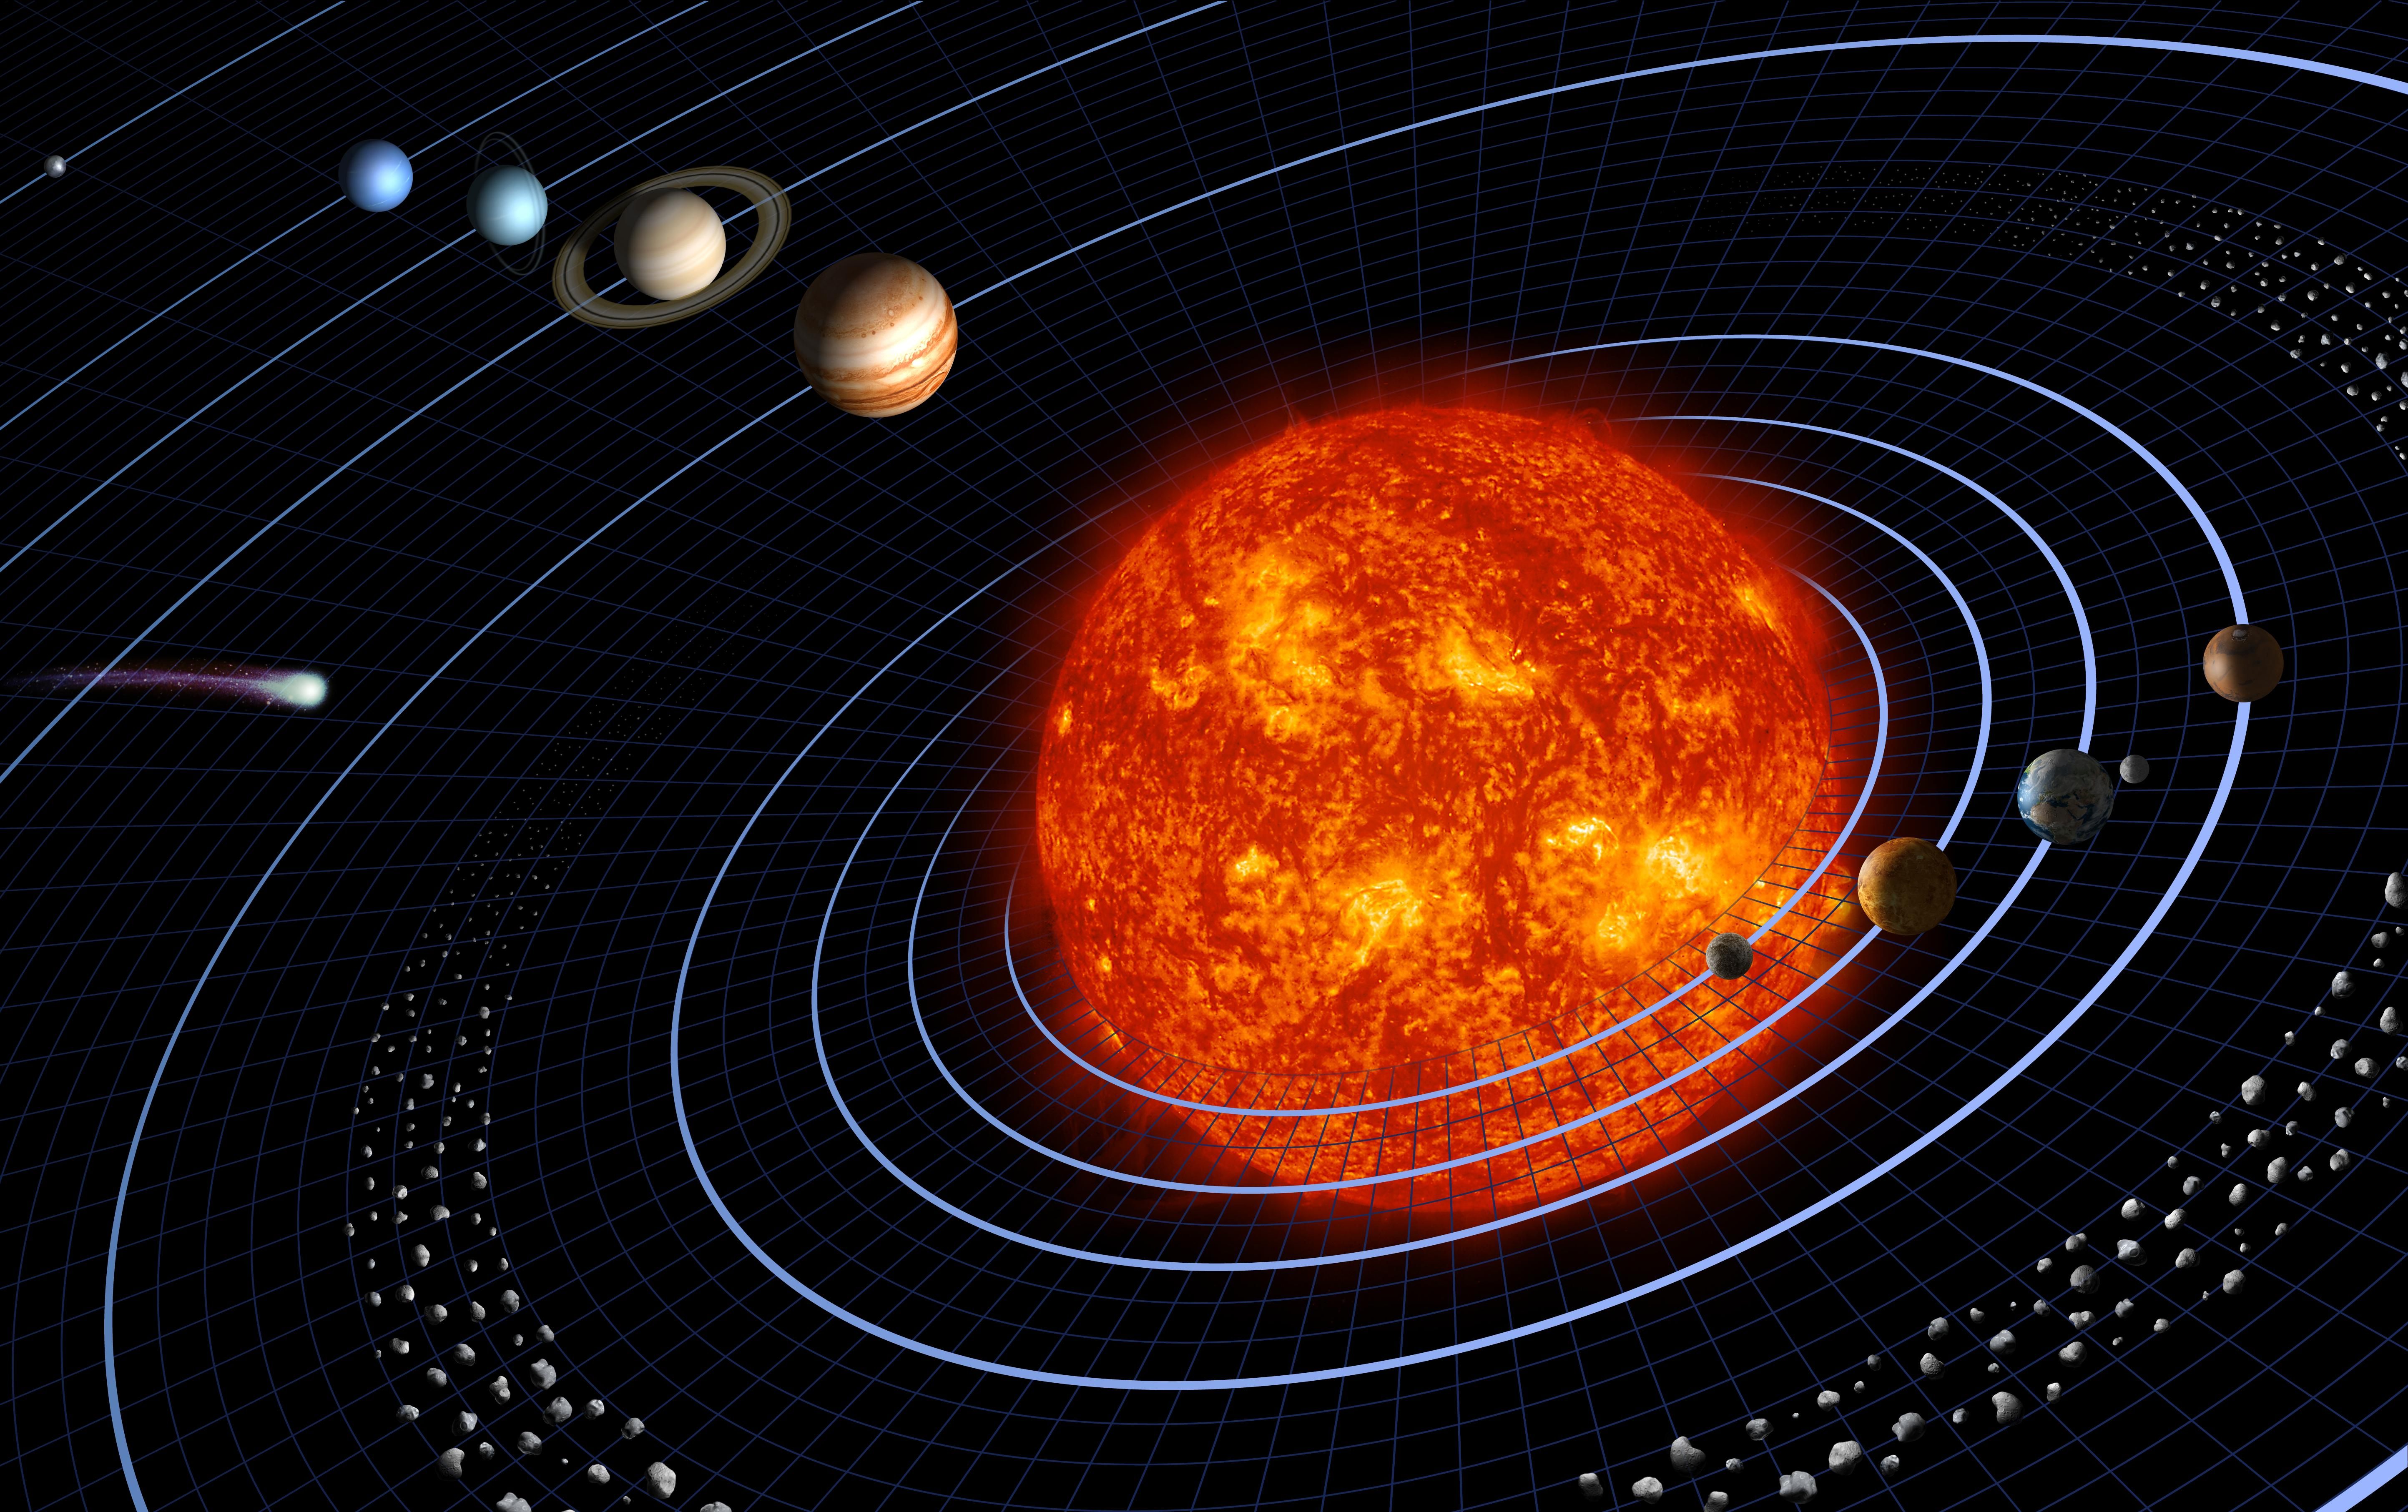 The planets vibrate with different harmonious overtones based on the length of their orbital cycles around the sun.